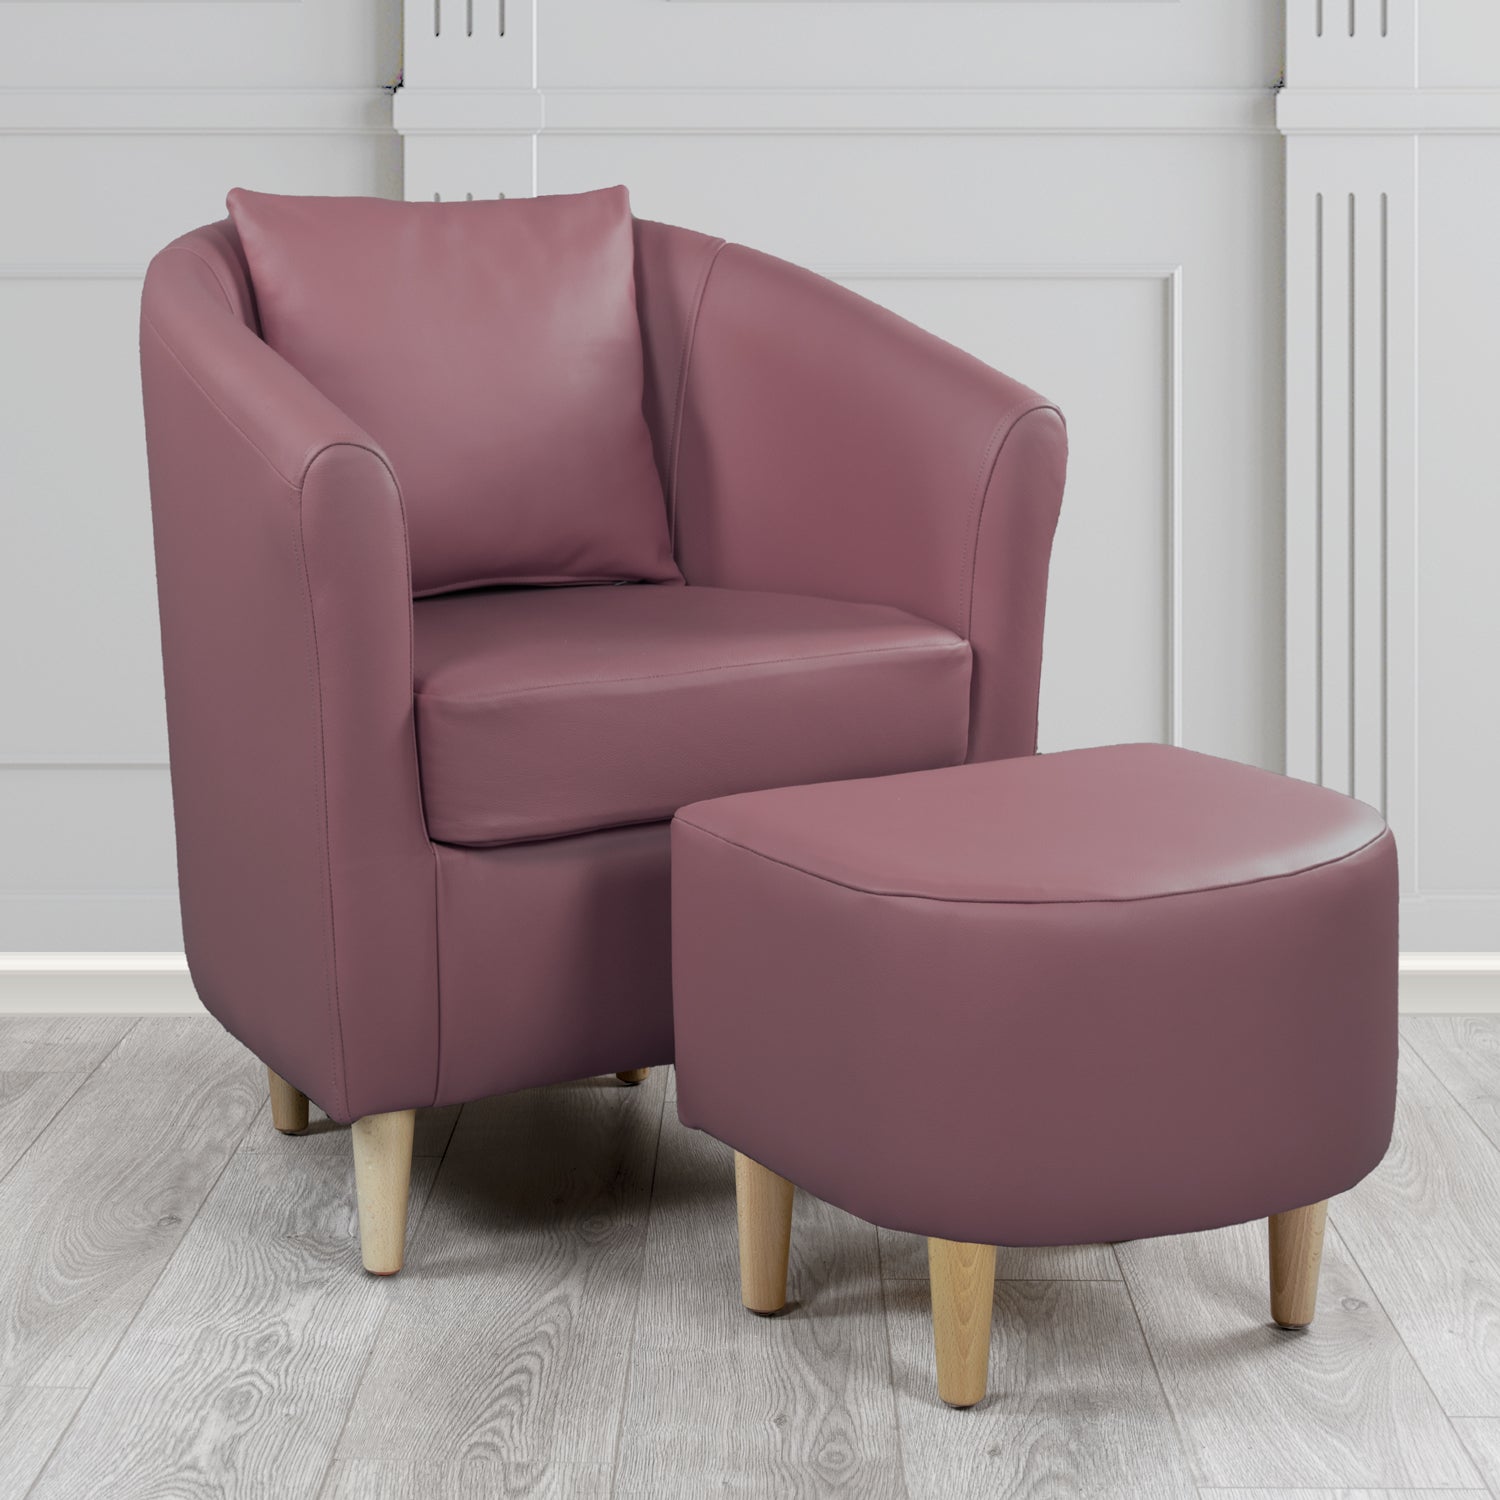 St Tropez Shelly Amethyst Crib 5 Genuine Leather Tub Chair & Footstool Set With Scatter Cushion (6619463516202)